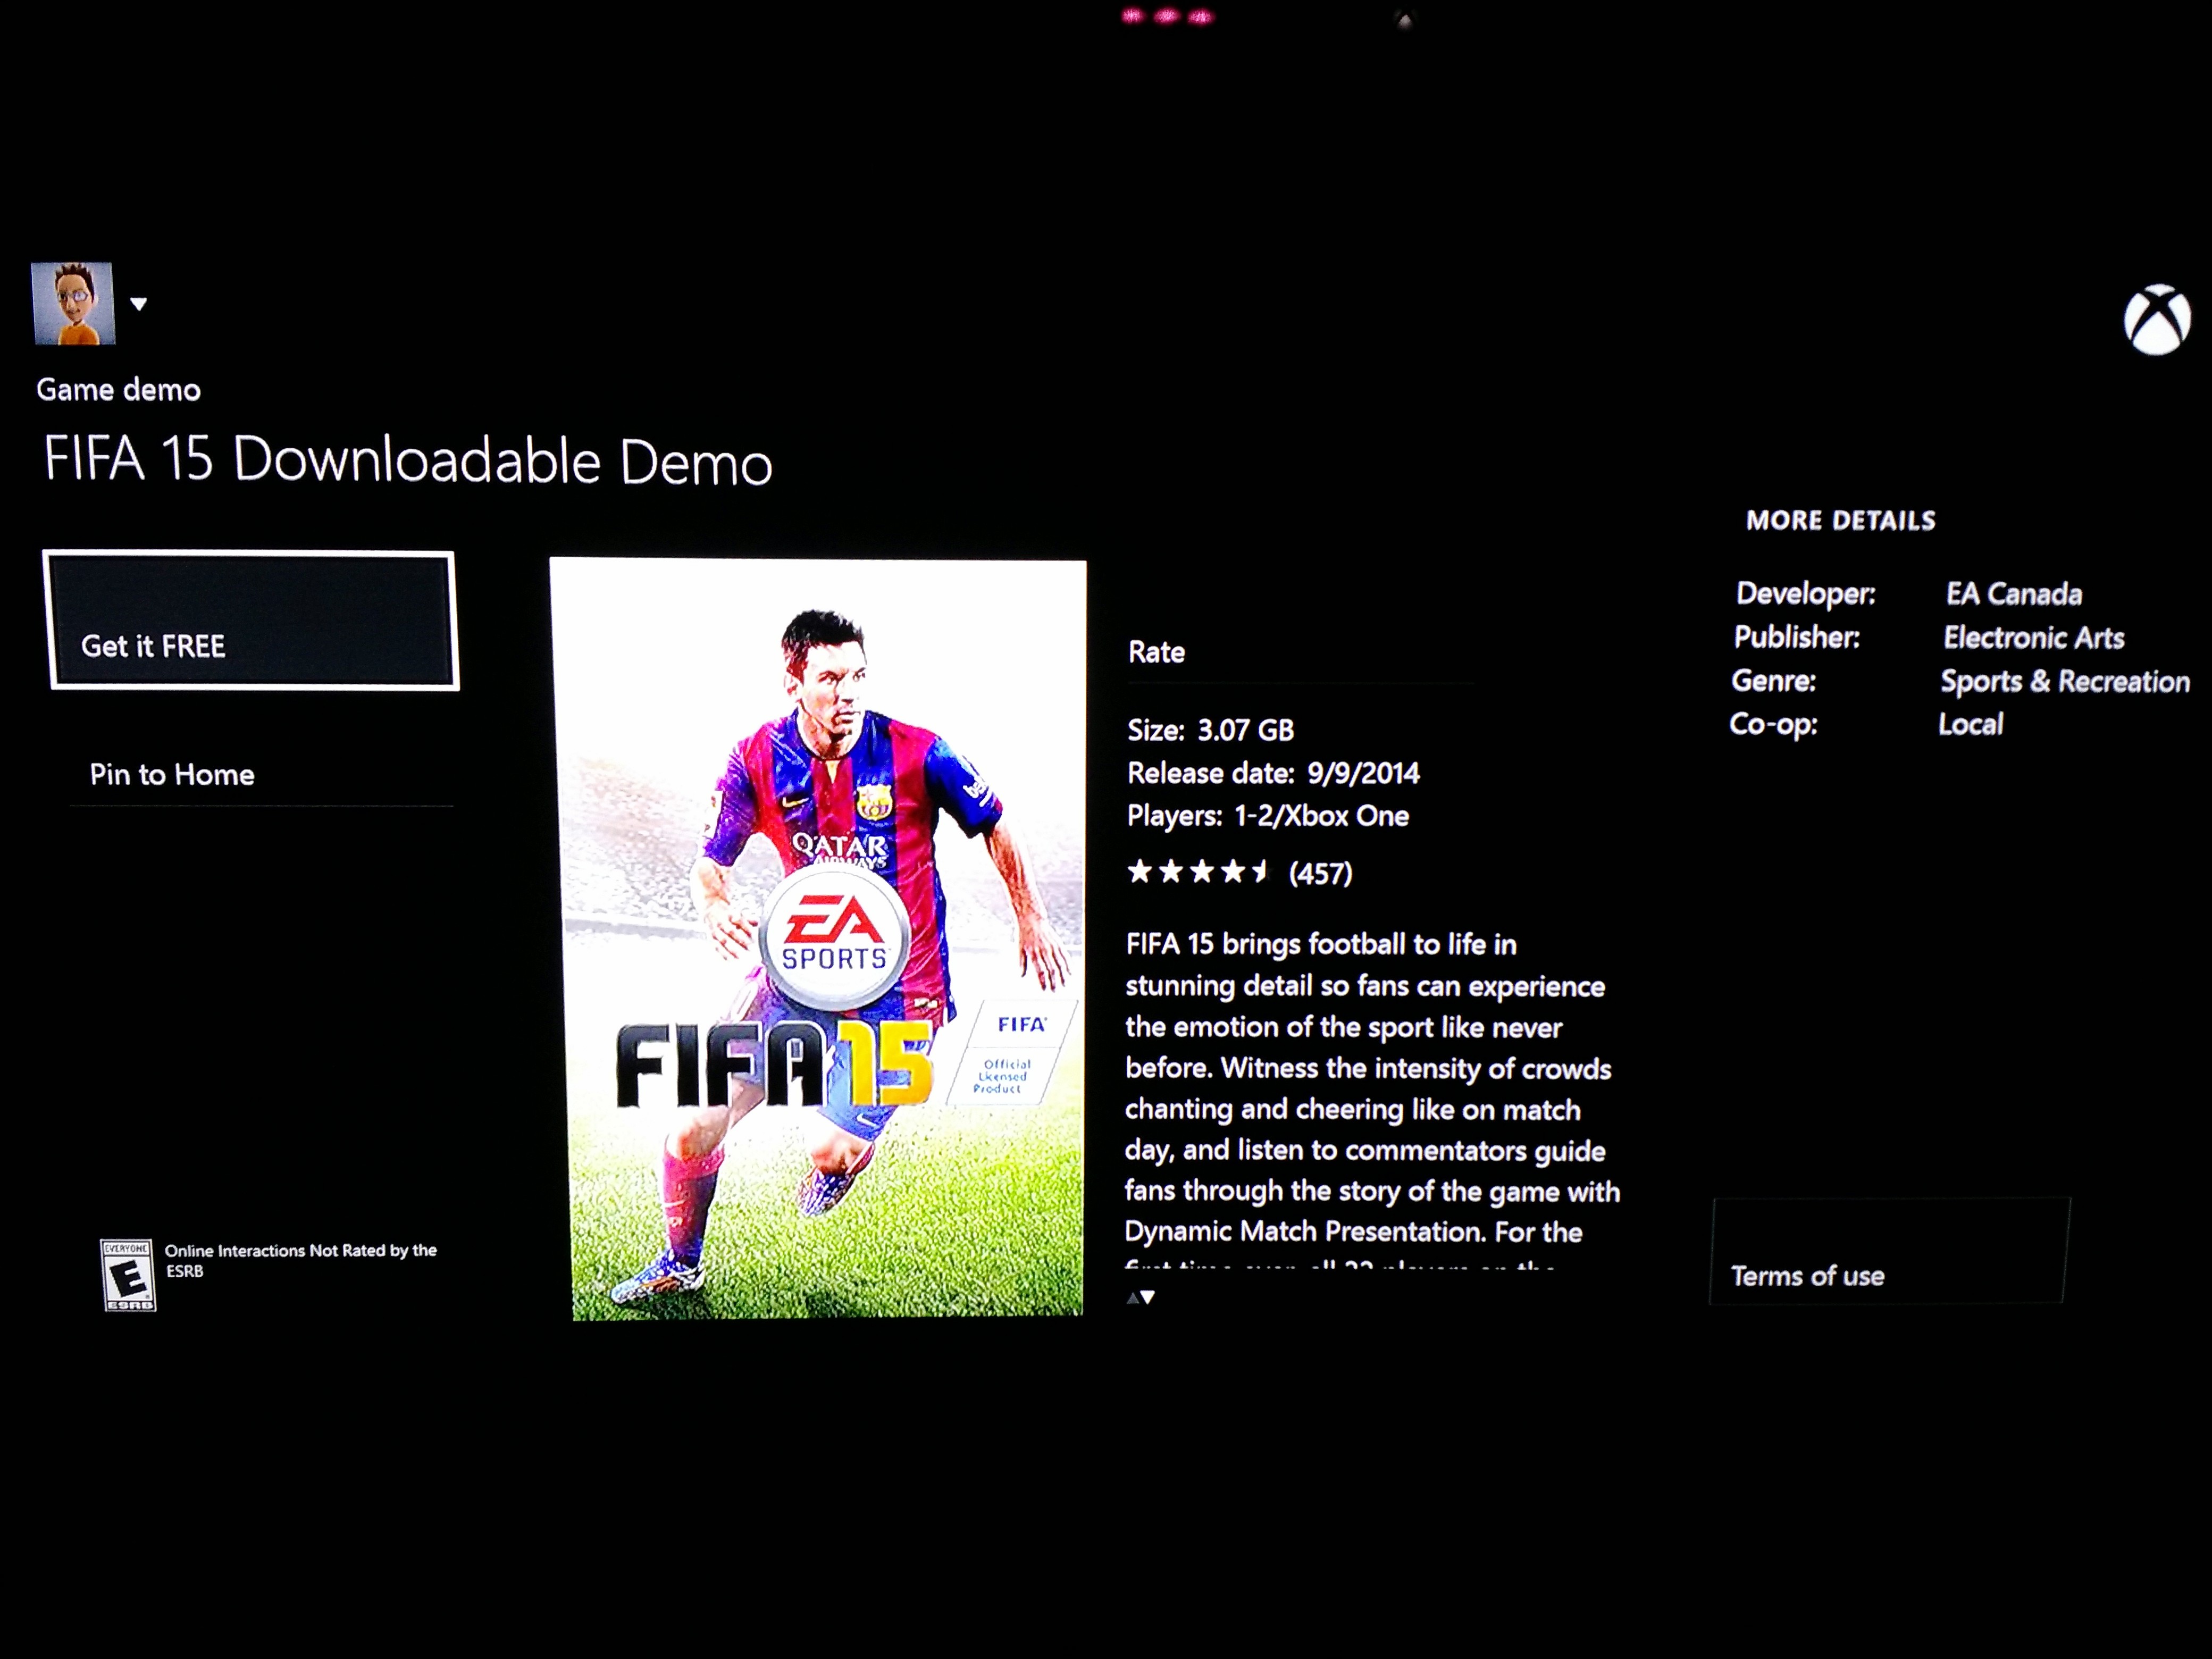 fifa 15 demo features